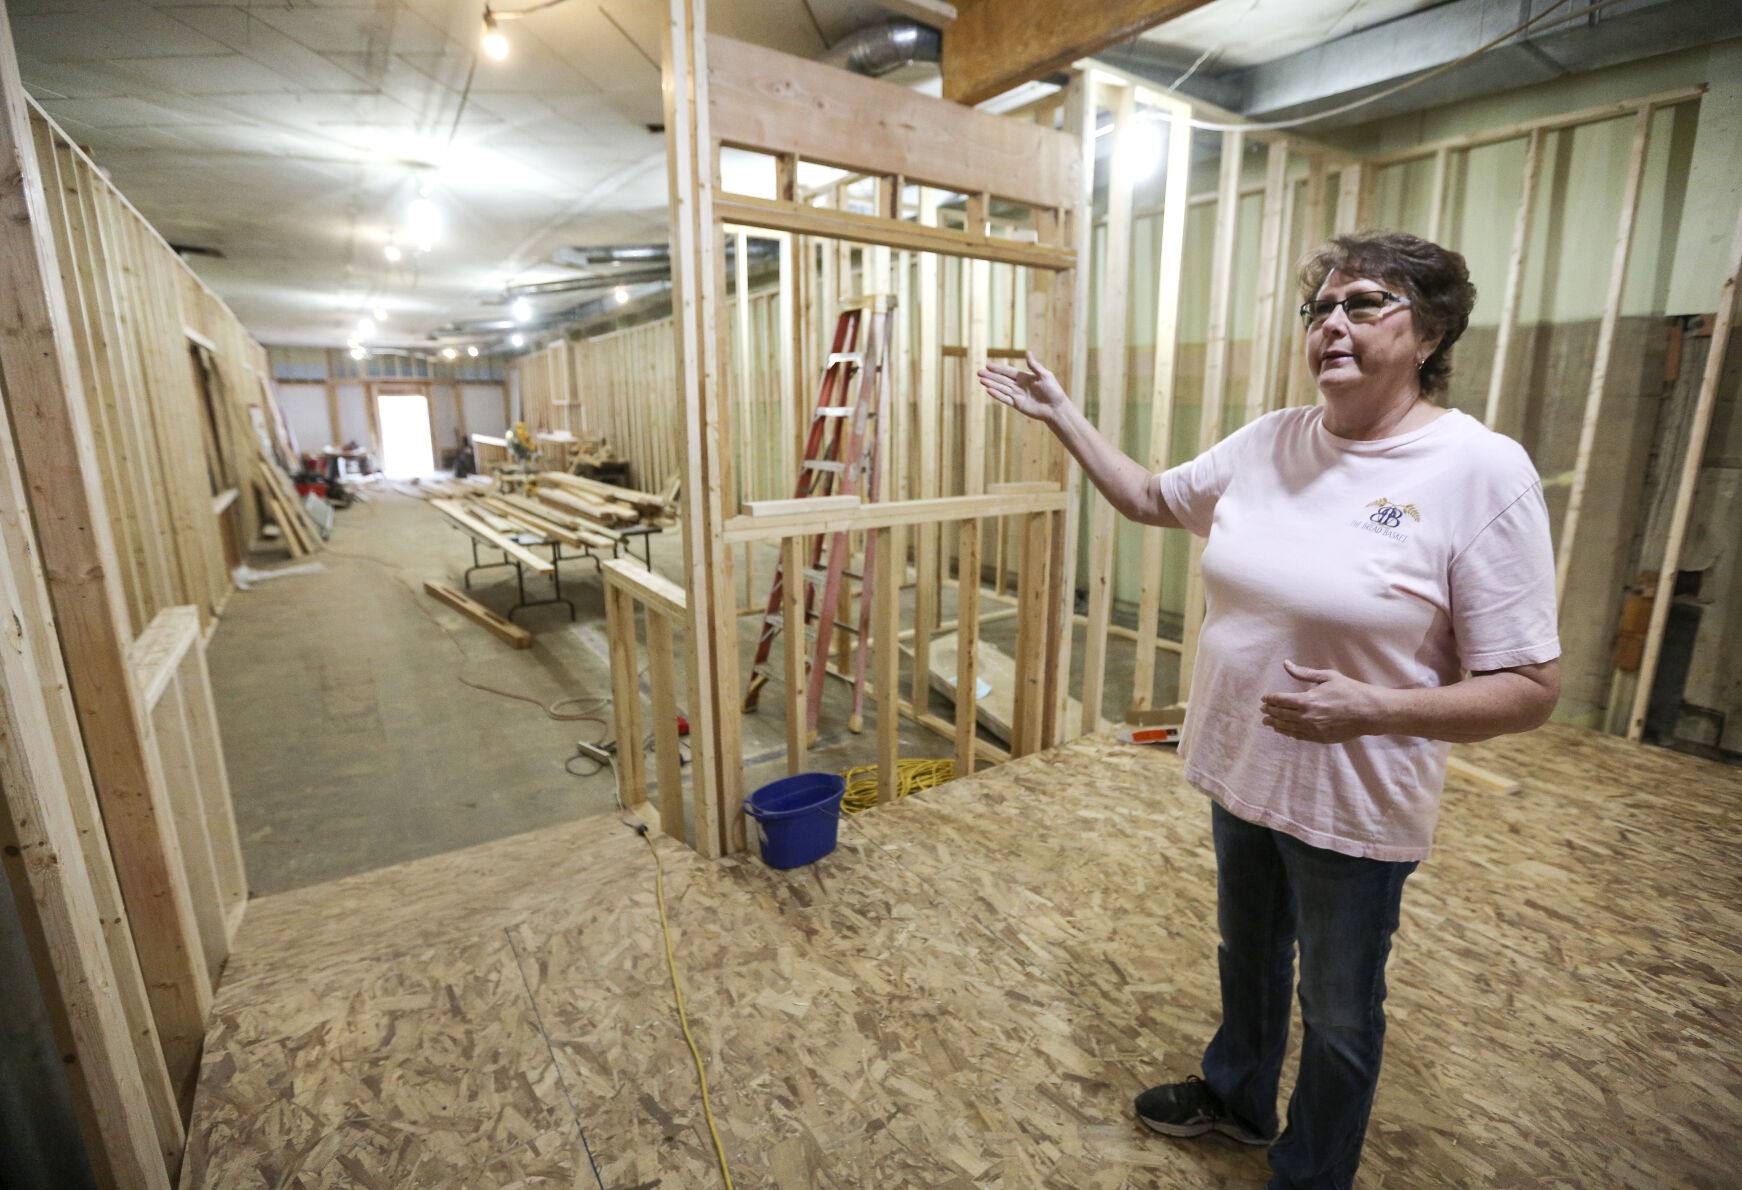 Owner Jackie Mormann stands in what will be the kitchen area of The Bread Basket located in Manchester, Iowa, on Friday, Oct. 28, 2022.    PHOTO CREDIT: Dave Kettering